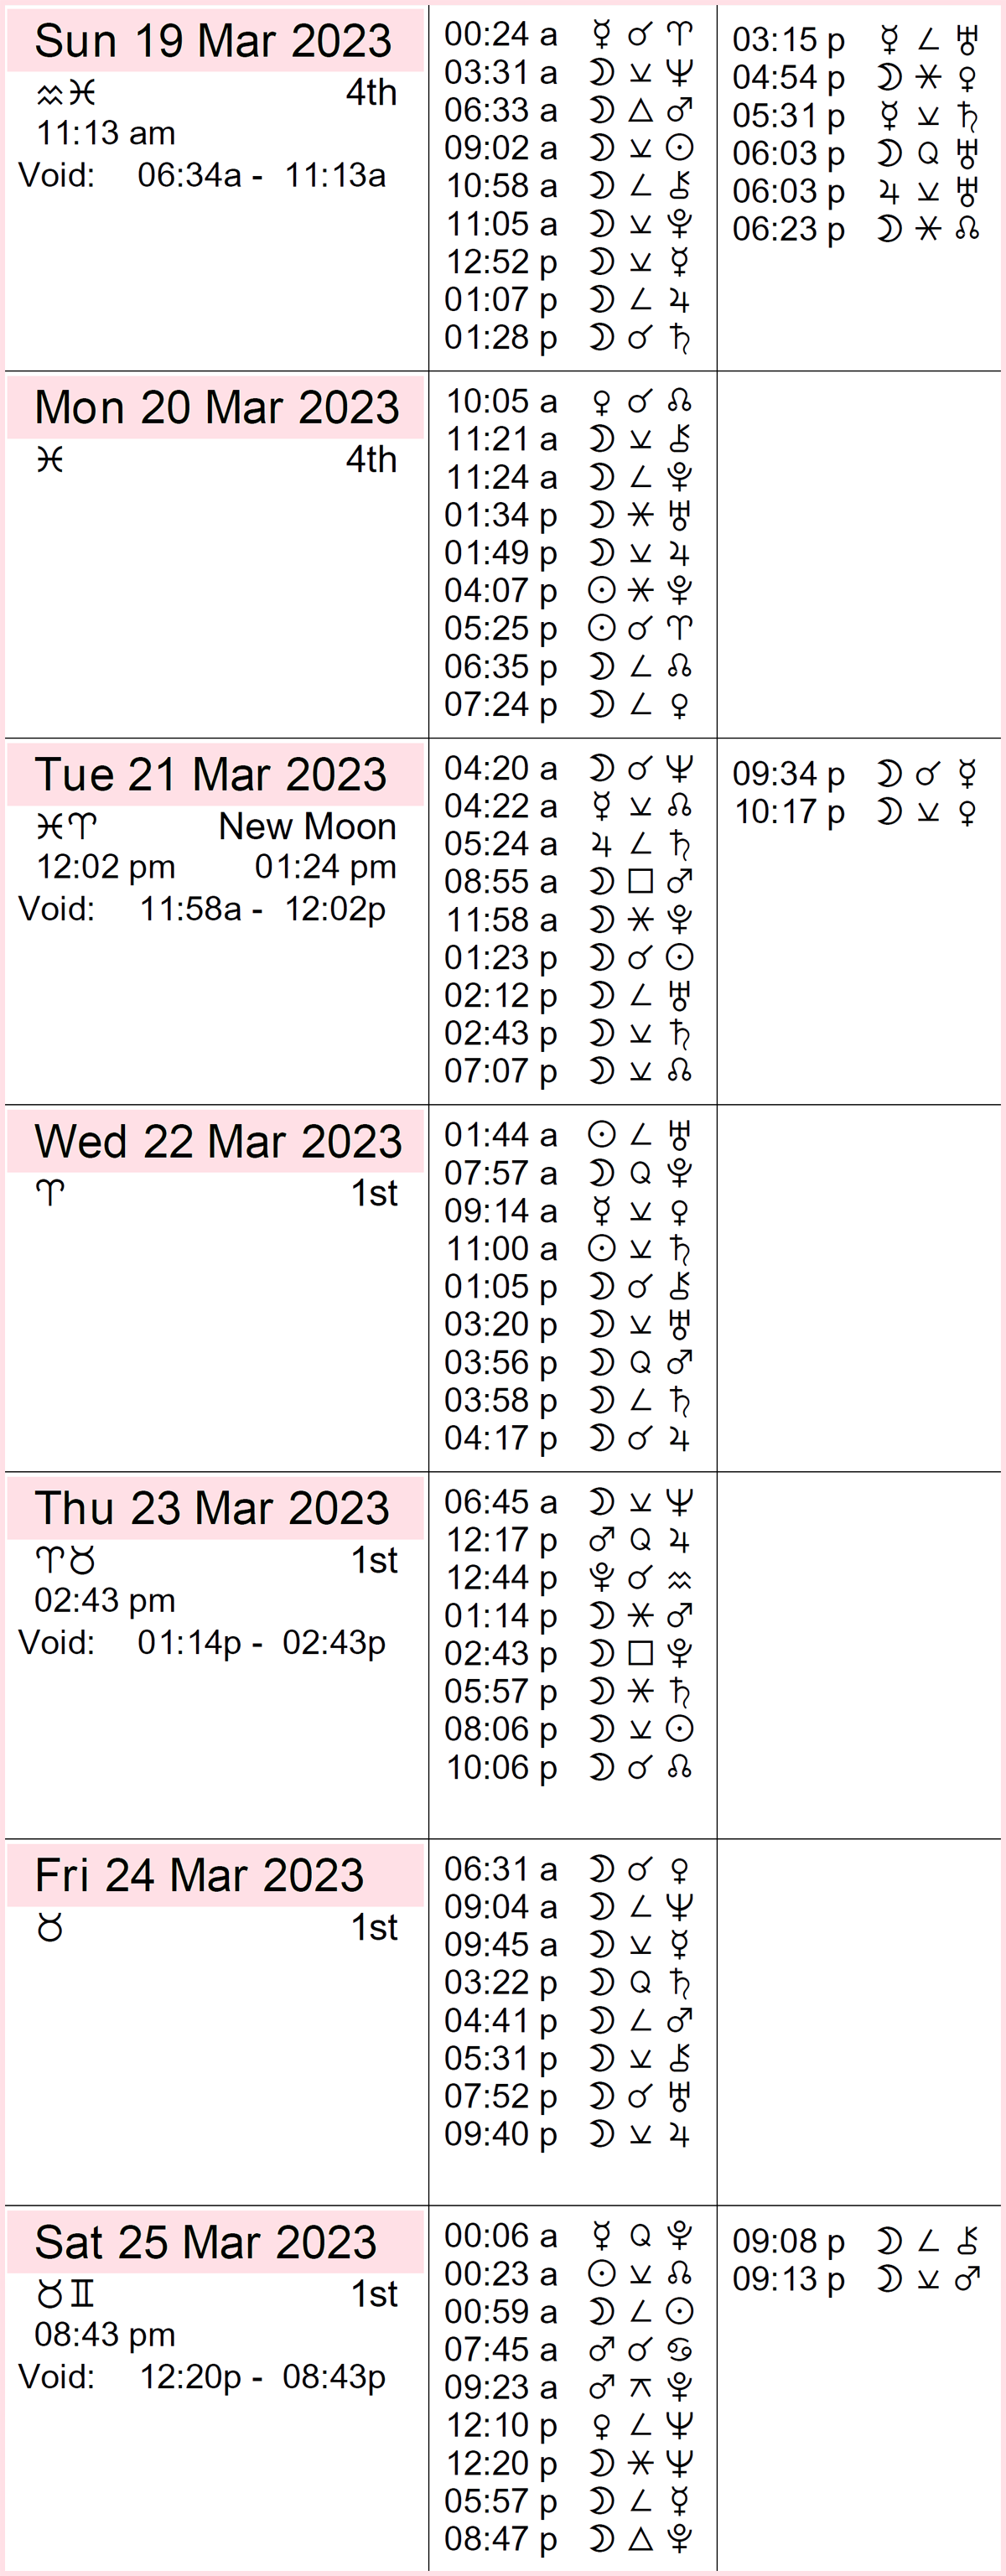 Calendar details the aspects for each day of the week, listed in order below the calendar